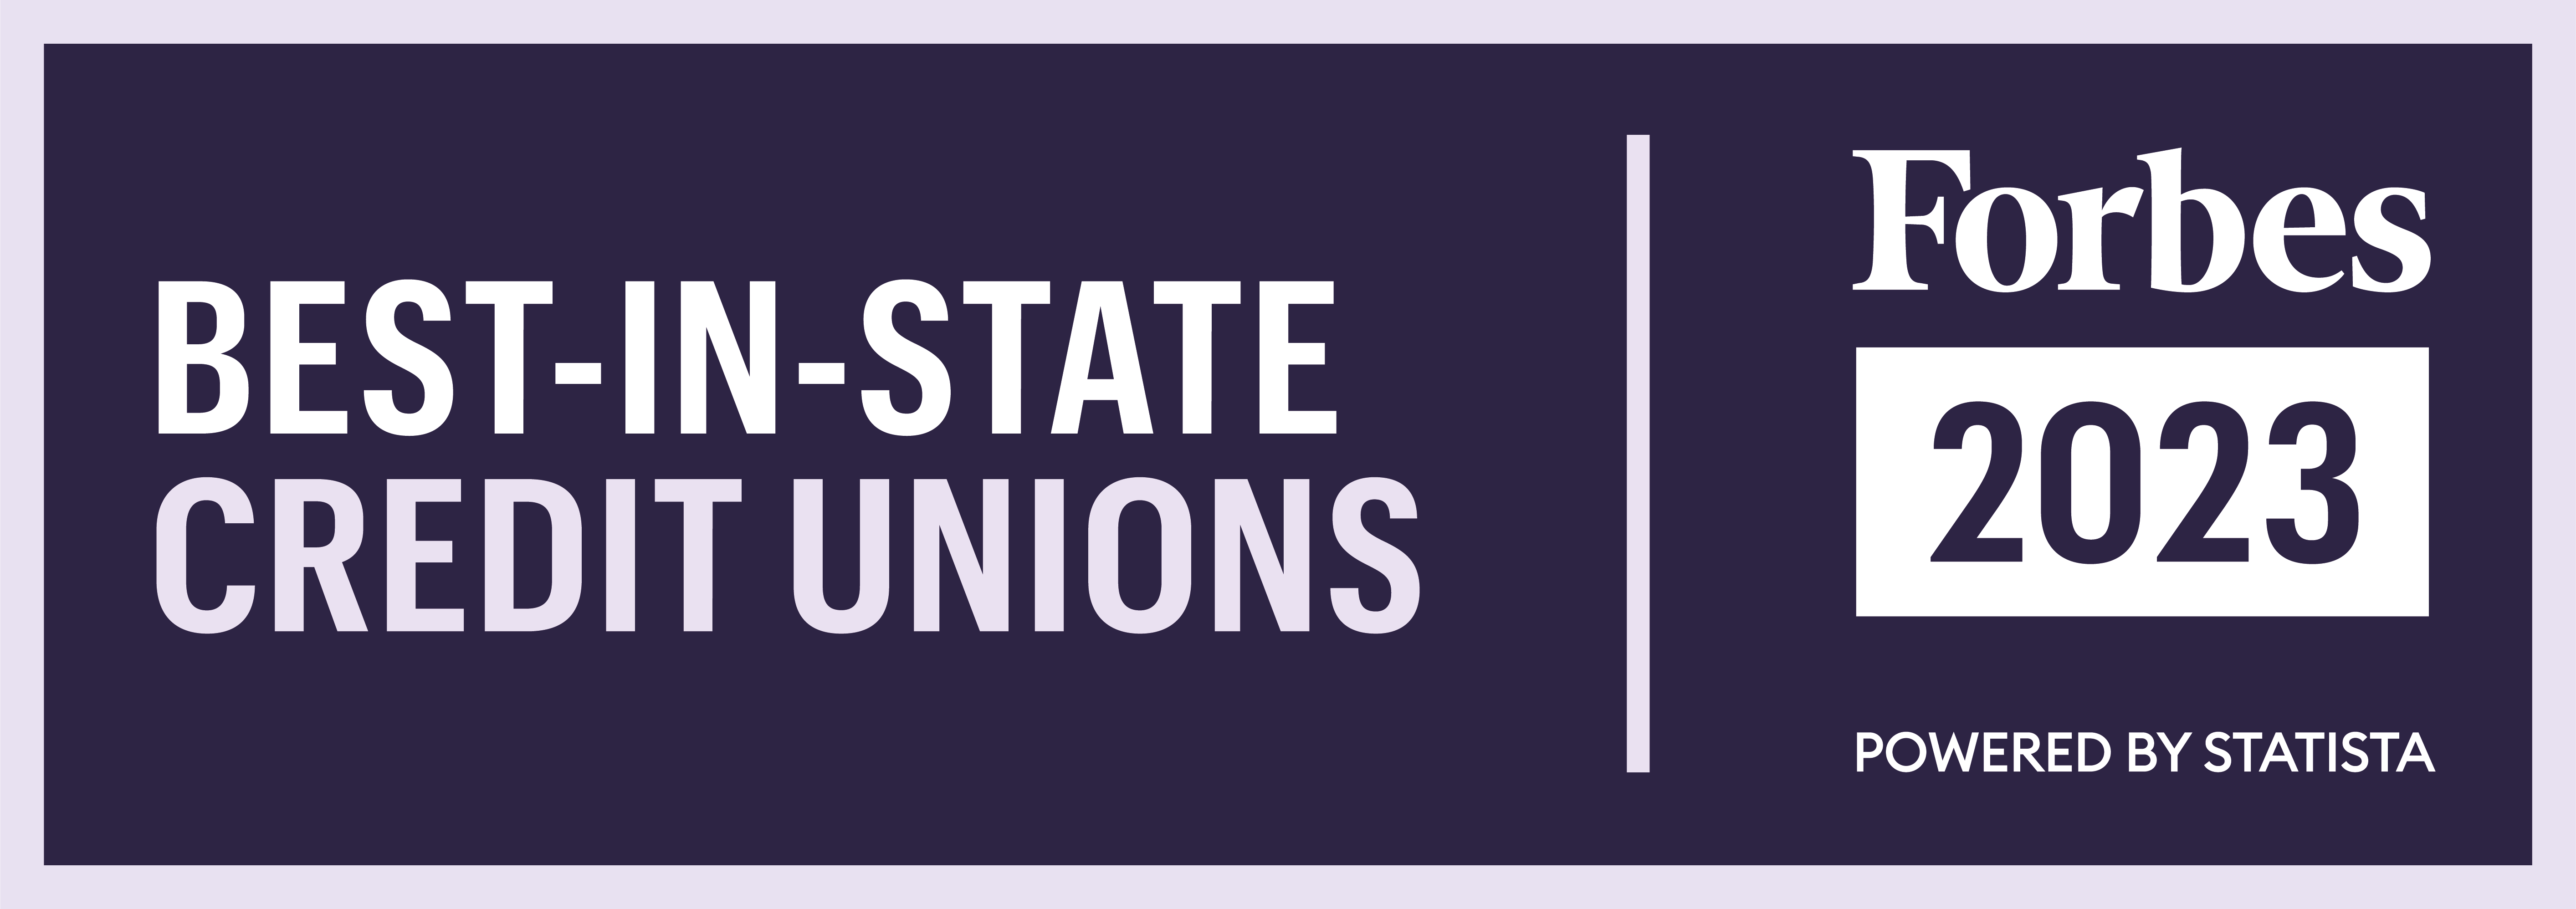 Forbes Best In State Credit Unions